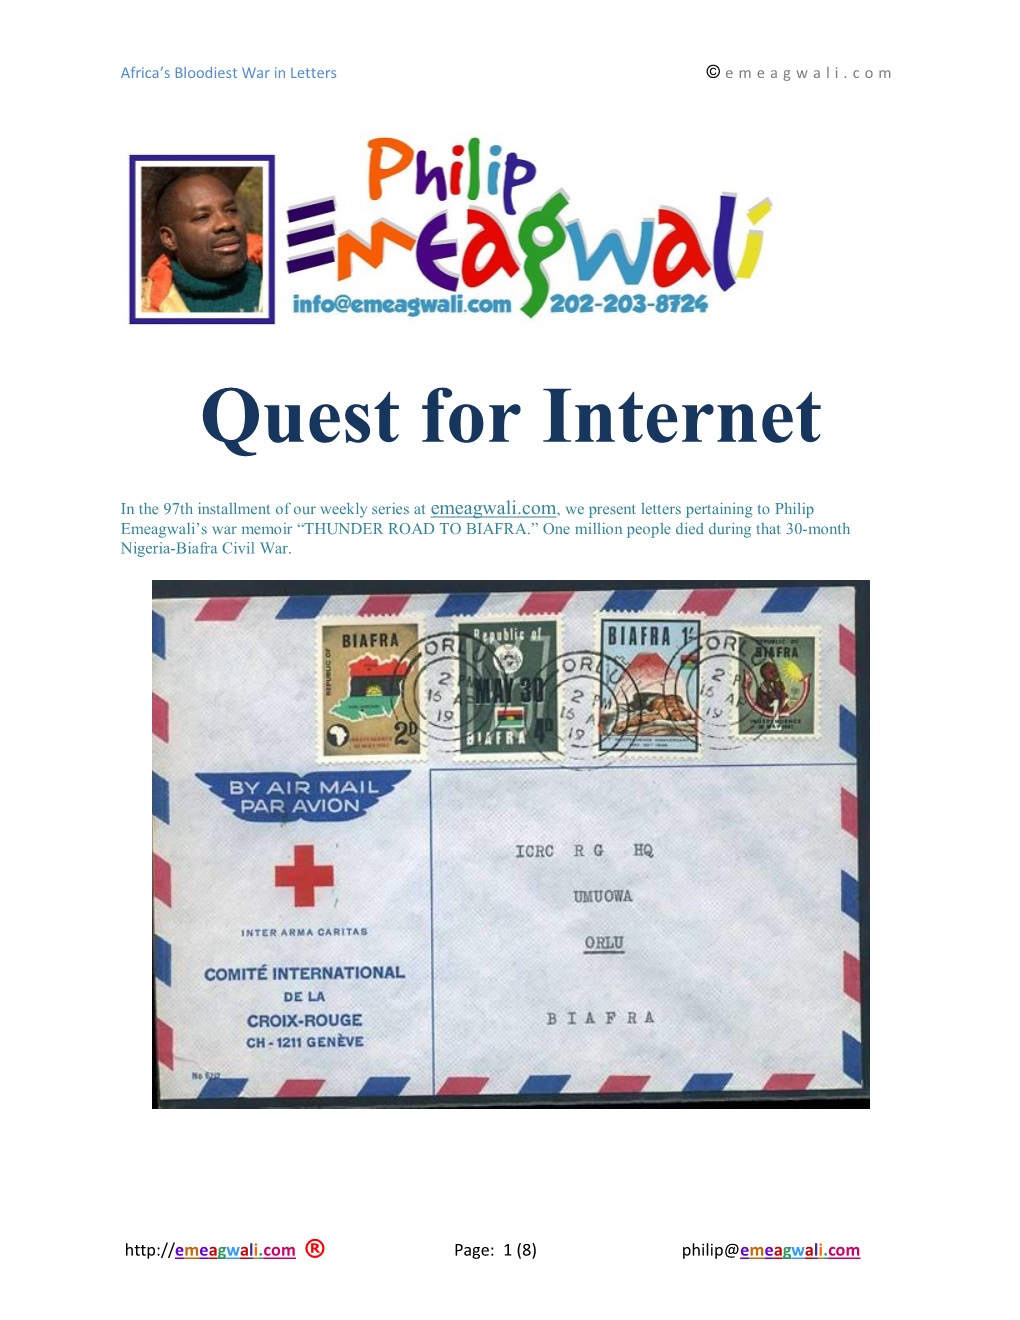 My Quest for an Internet